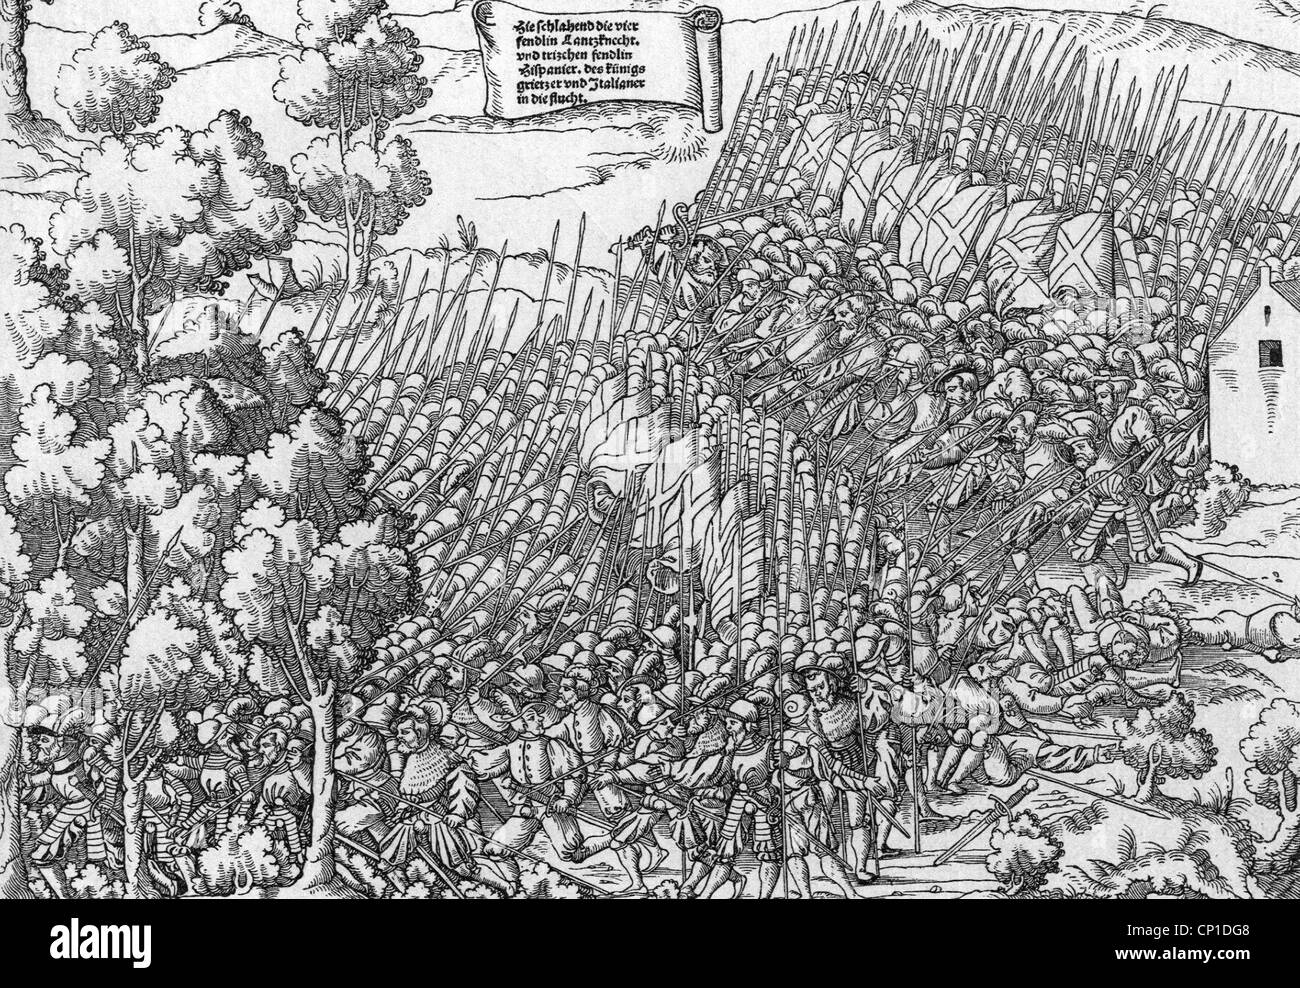 military, landsknechts, German landsknechts fighting against swiss soldiers, scene from the Battle of Cerisole, 15.4.1544, woodcut by Hans Schaeufelin the Younger, 1582, victory of the French under Francis of Bourbon against the Imperial habsburg troops under the Marquis del Vasto, war, France, Italy, Switzerland, mercenaries, infantry, weapons, lances, pikes, flags, dead, killed, 16th century, historic, historical, Schaufelin, Schäufelin, people, Additional-Rights-Clearences-Not Available Stock Photo